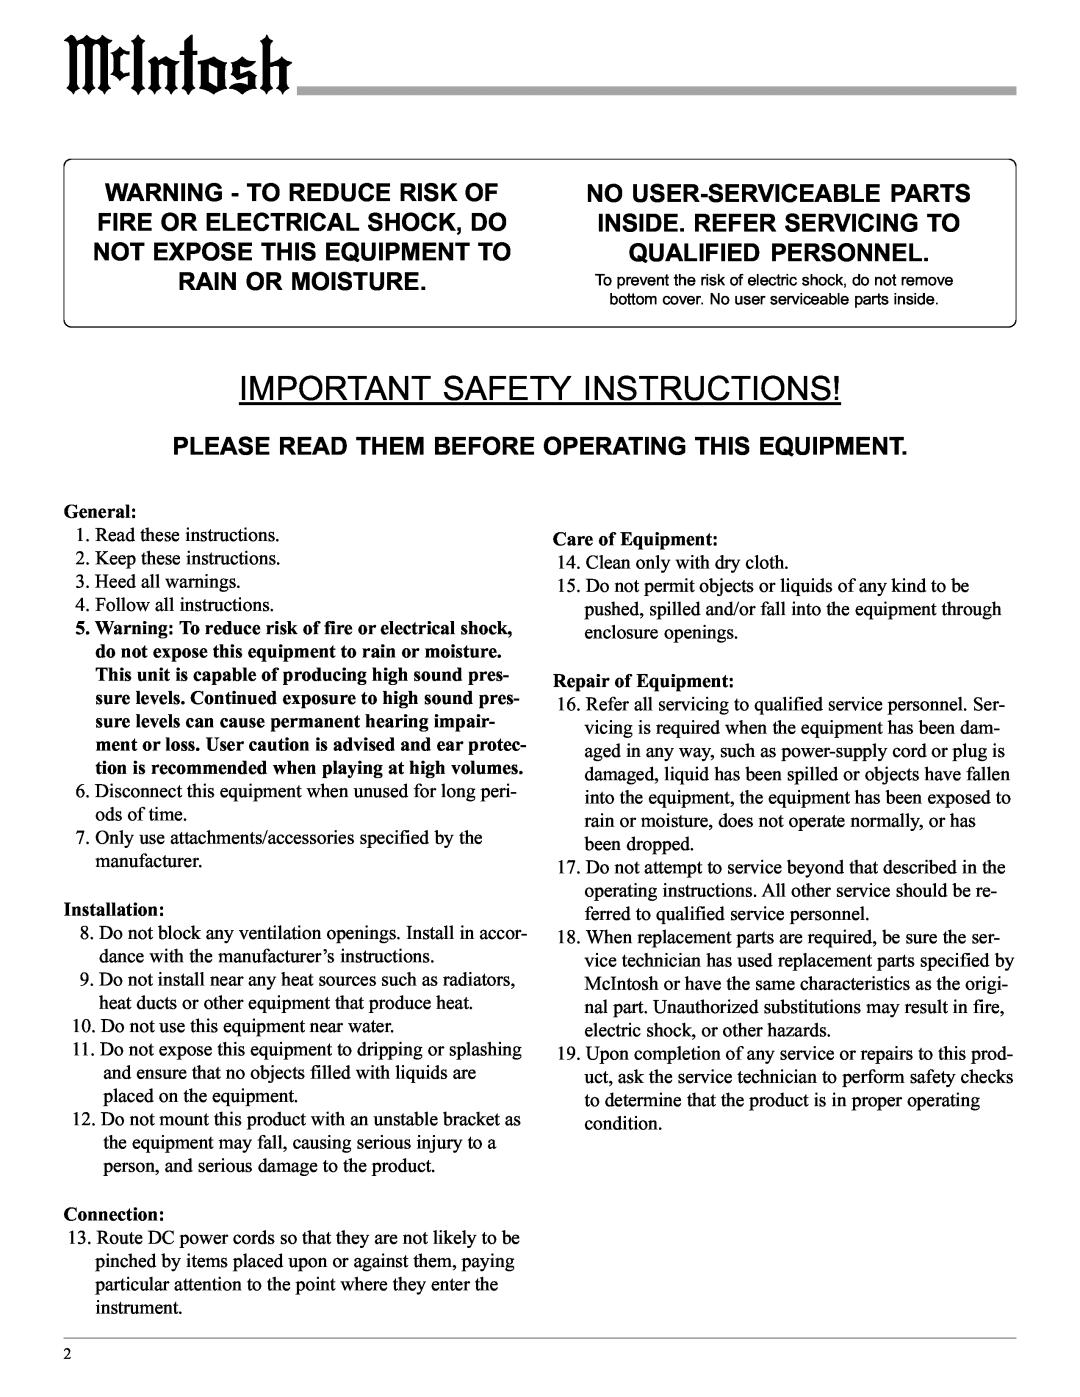 McIntosh MCC602TM Important Safety Instructions, Please Read Them Before Operating This Equipment, Qualified Personnel 